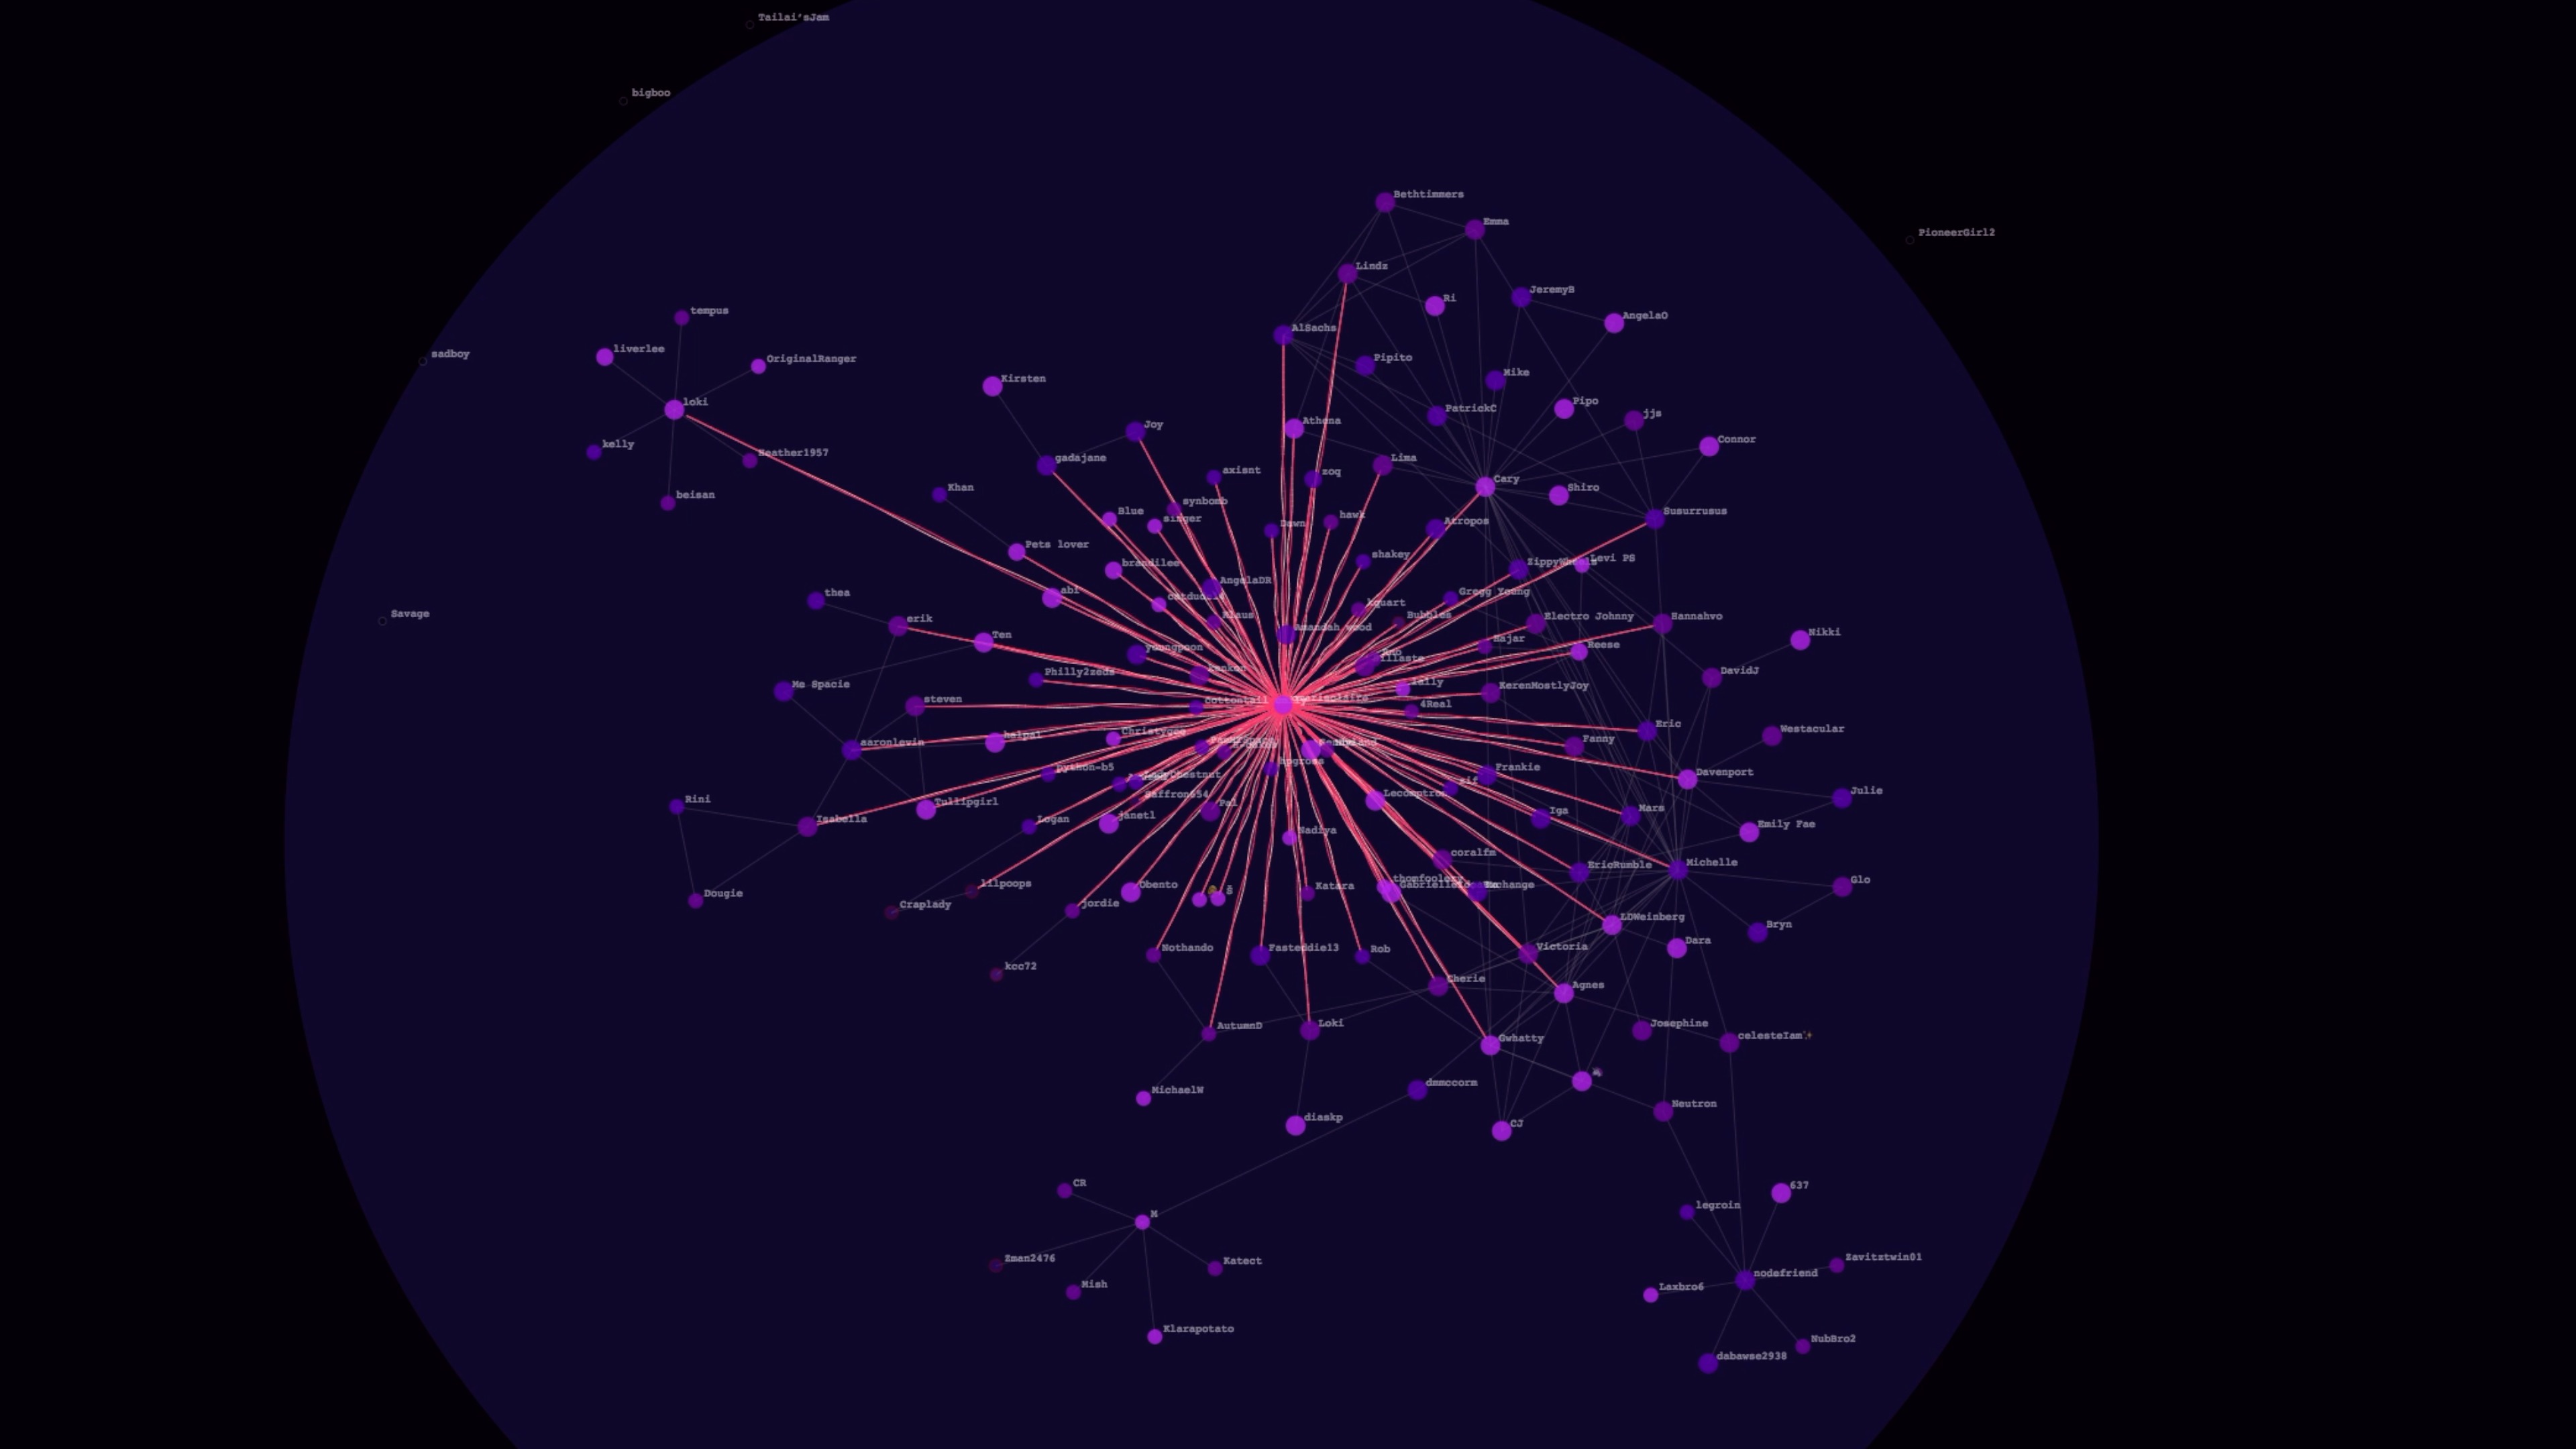 A grid of nodes connected by lines in a purple circle on a black background